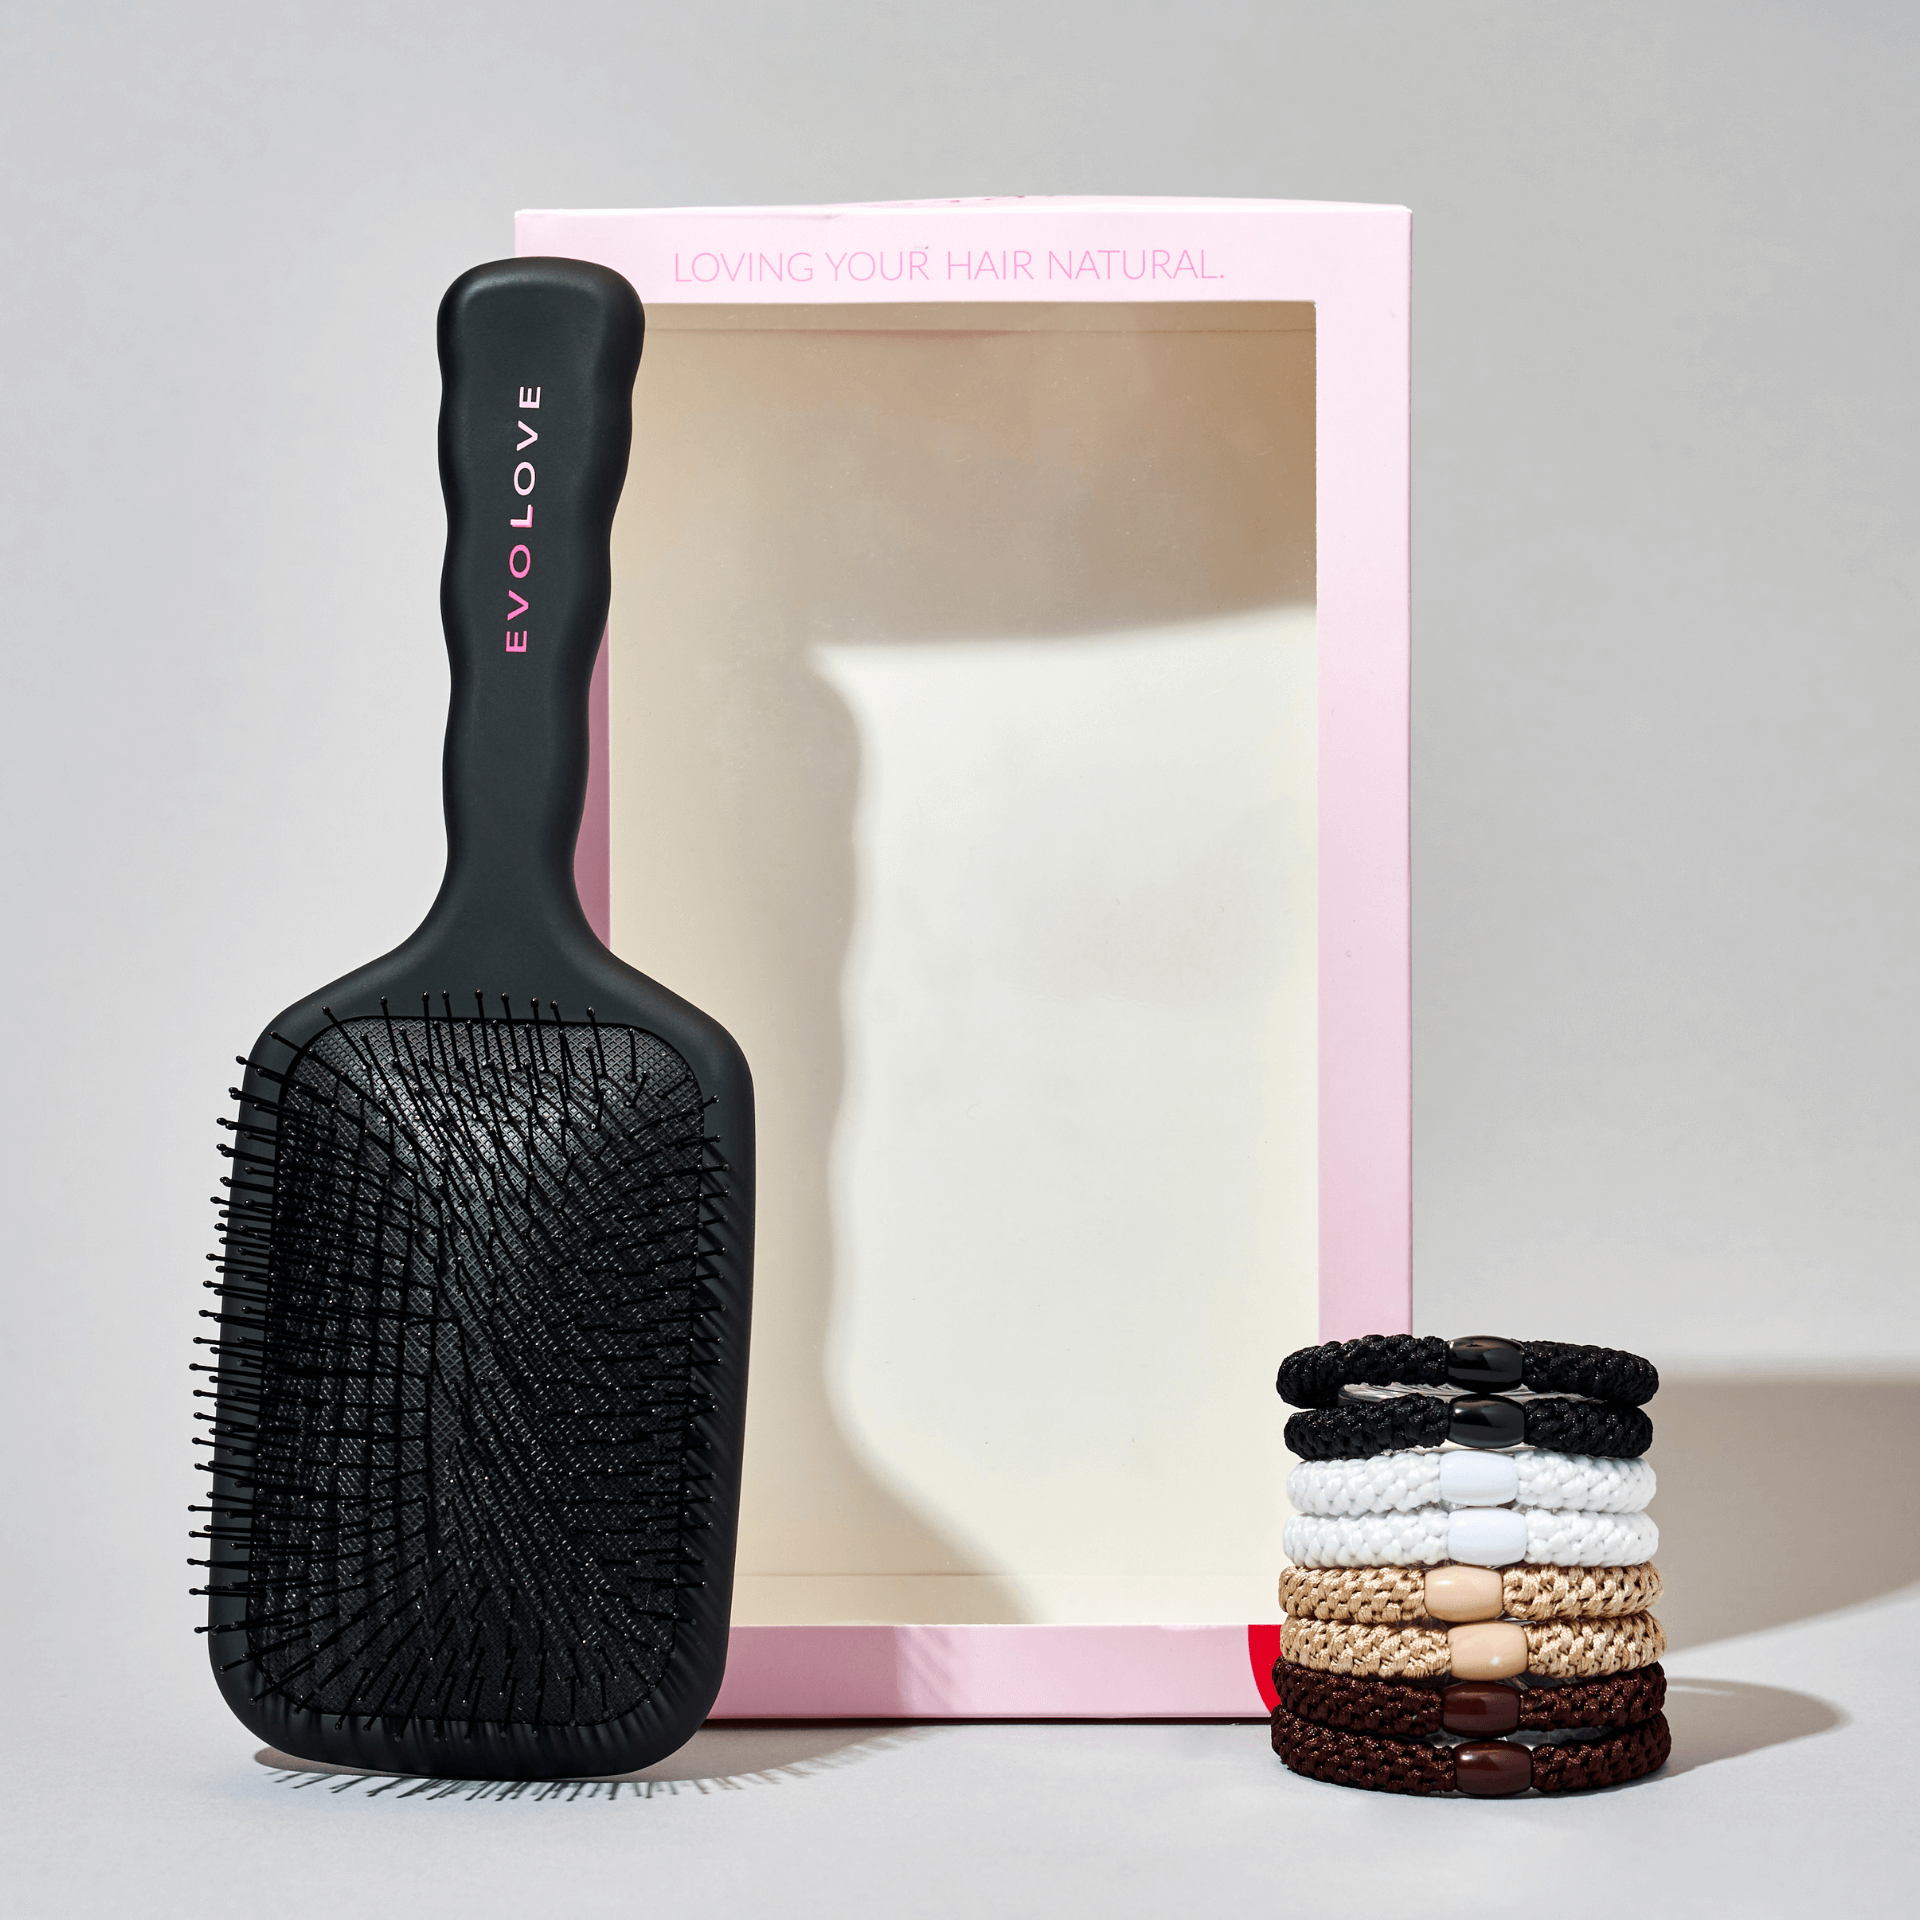 Hair brush and hair tie set displayed neatly next to each other.